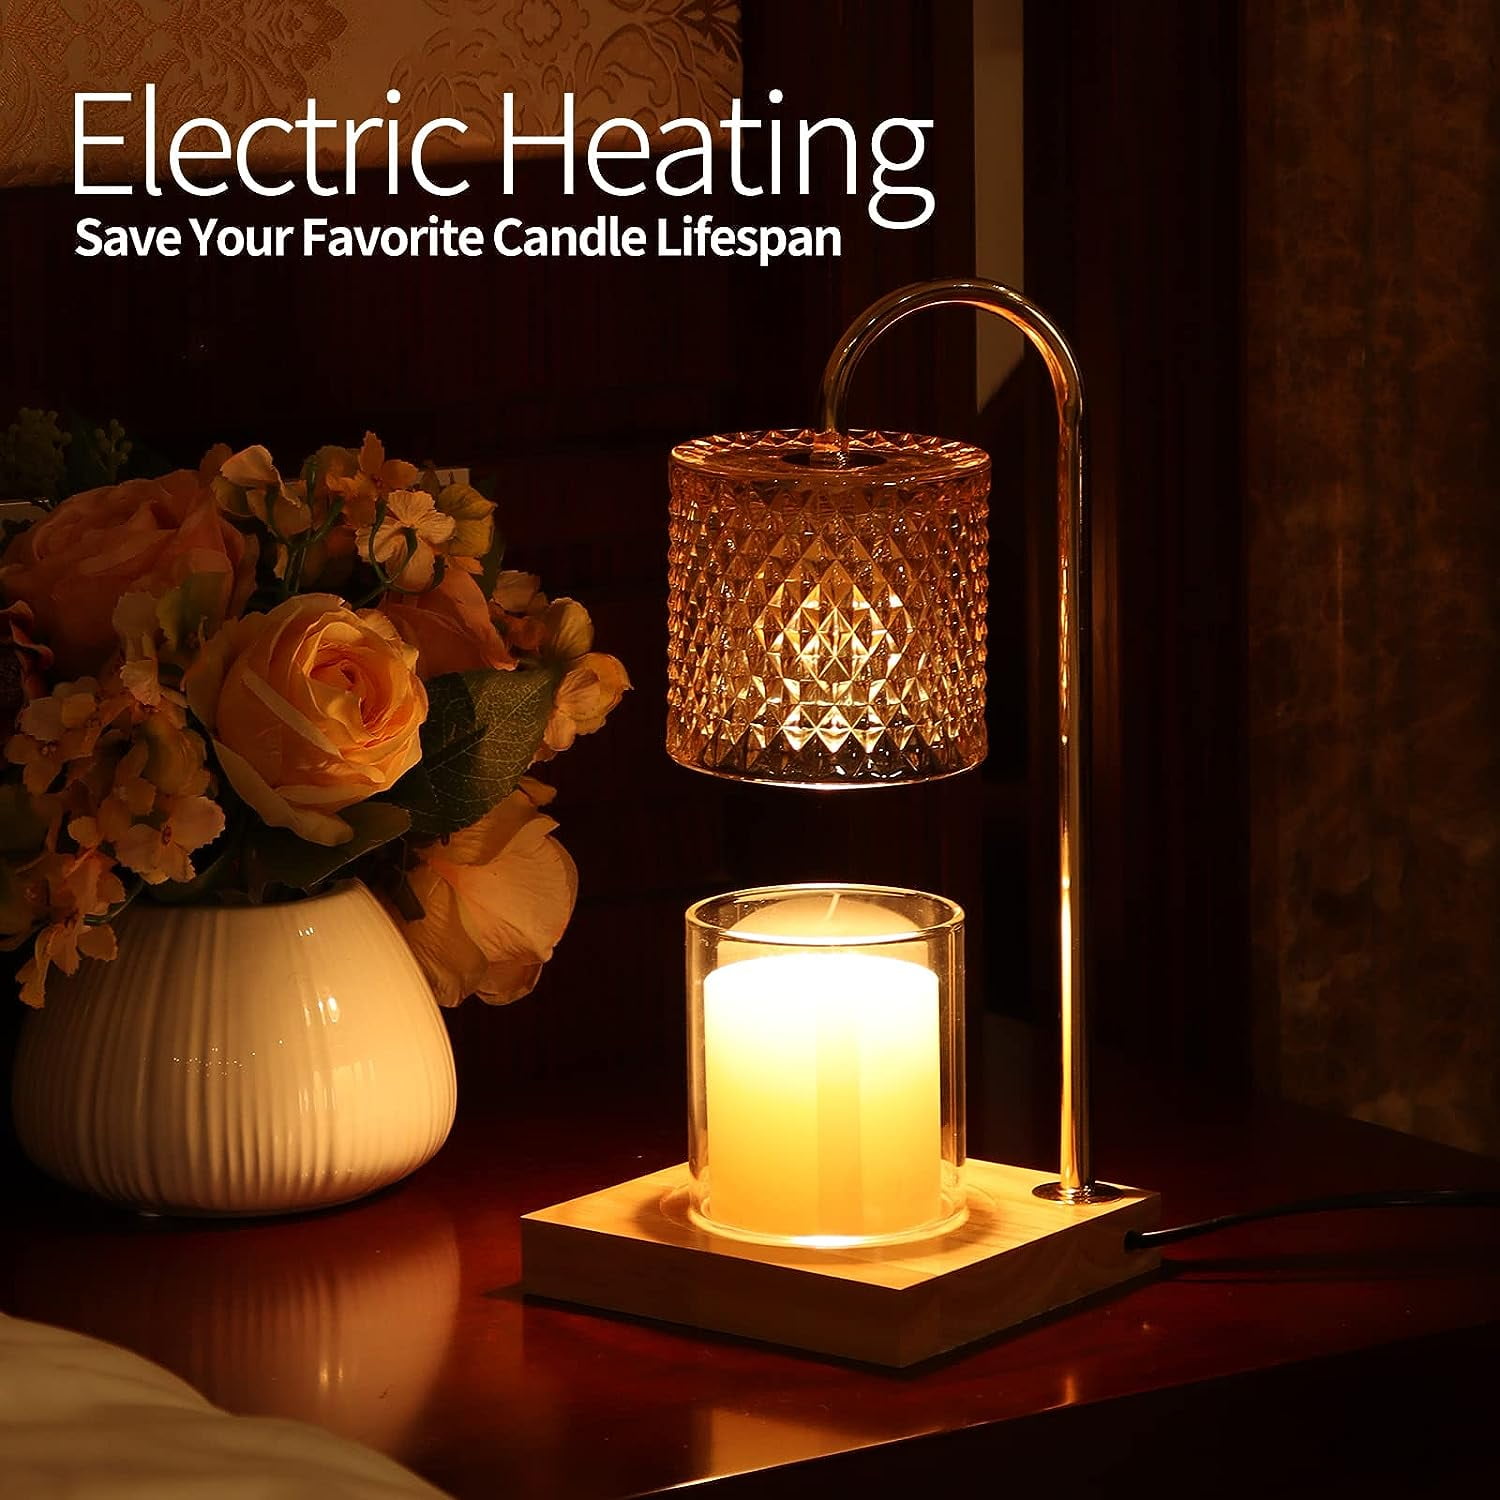 s Bestselling Candle Warmer Lamp Is the Perfect Cozy Home Decor